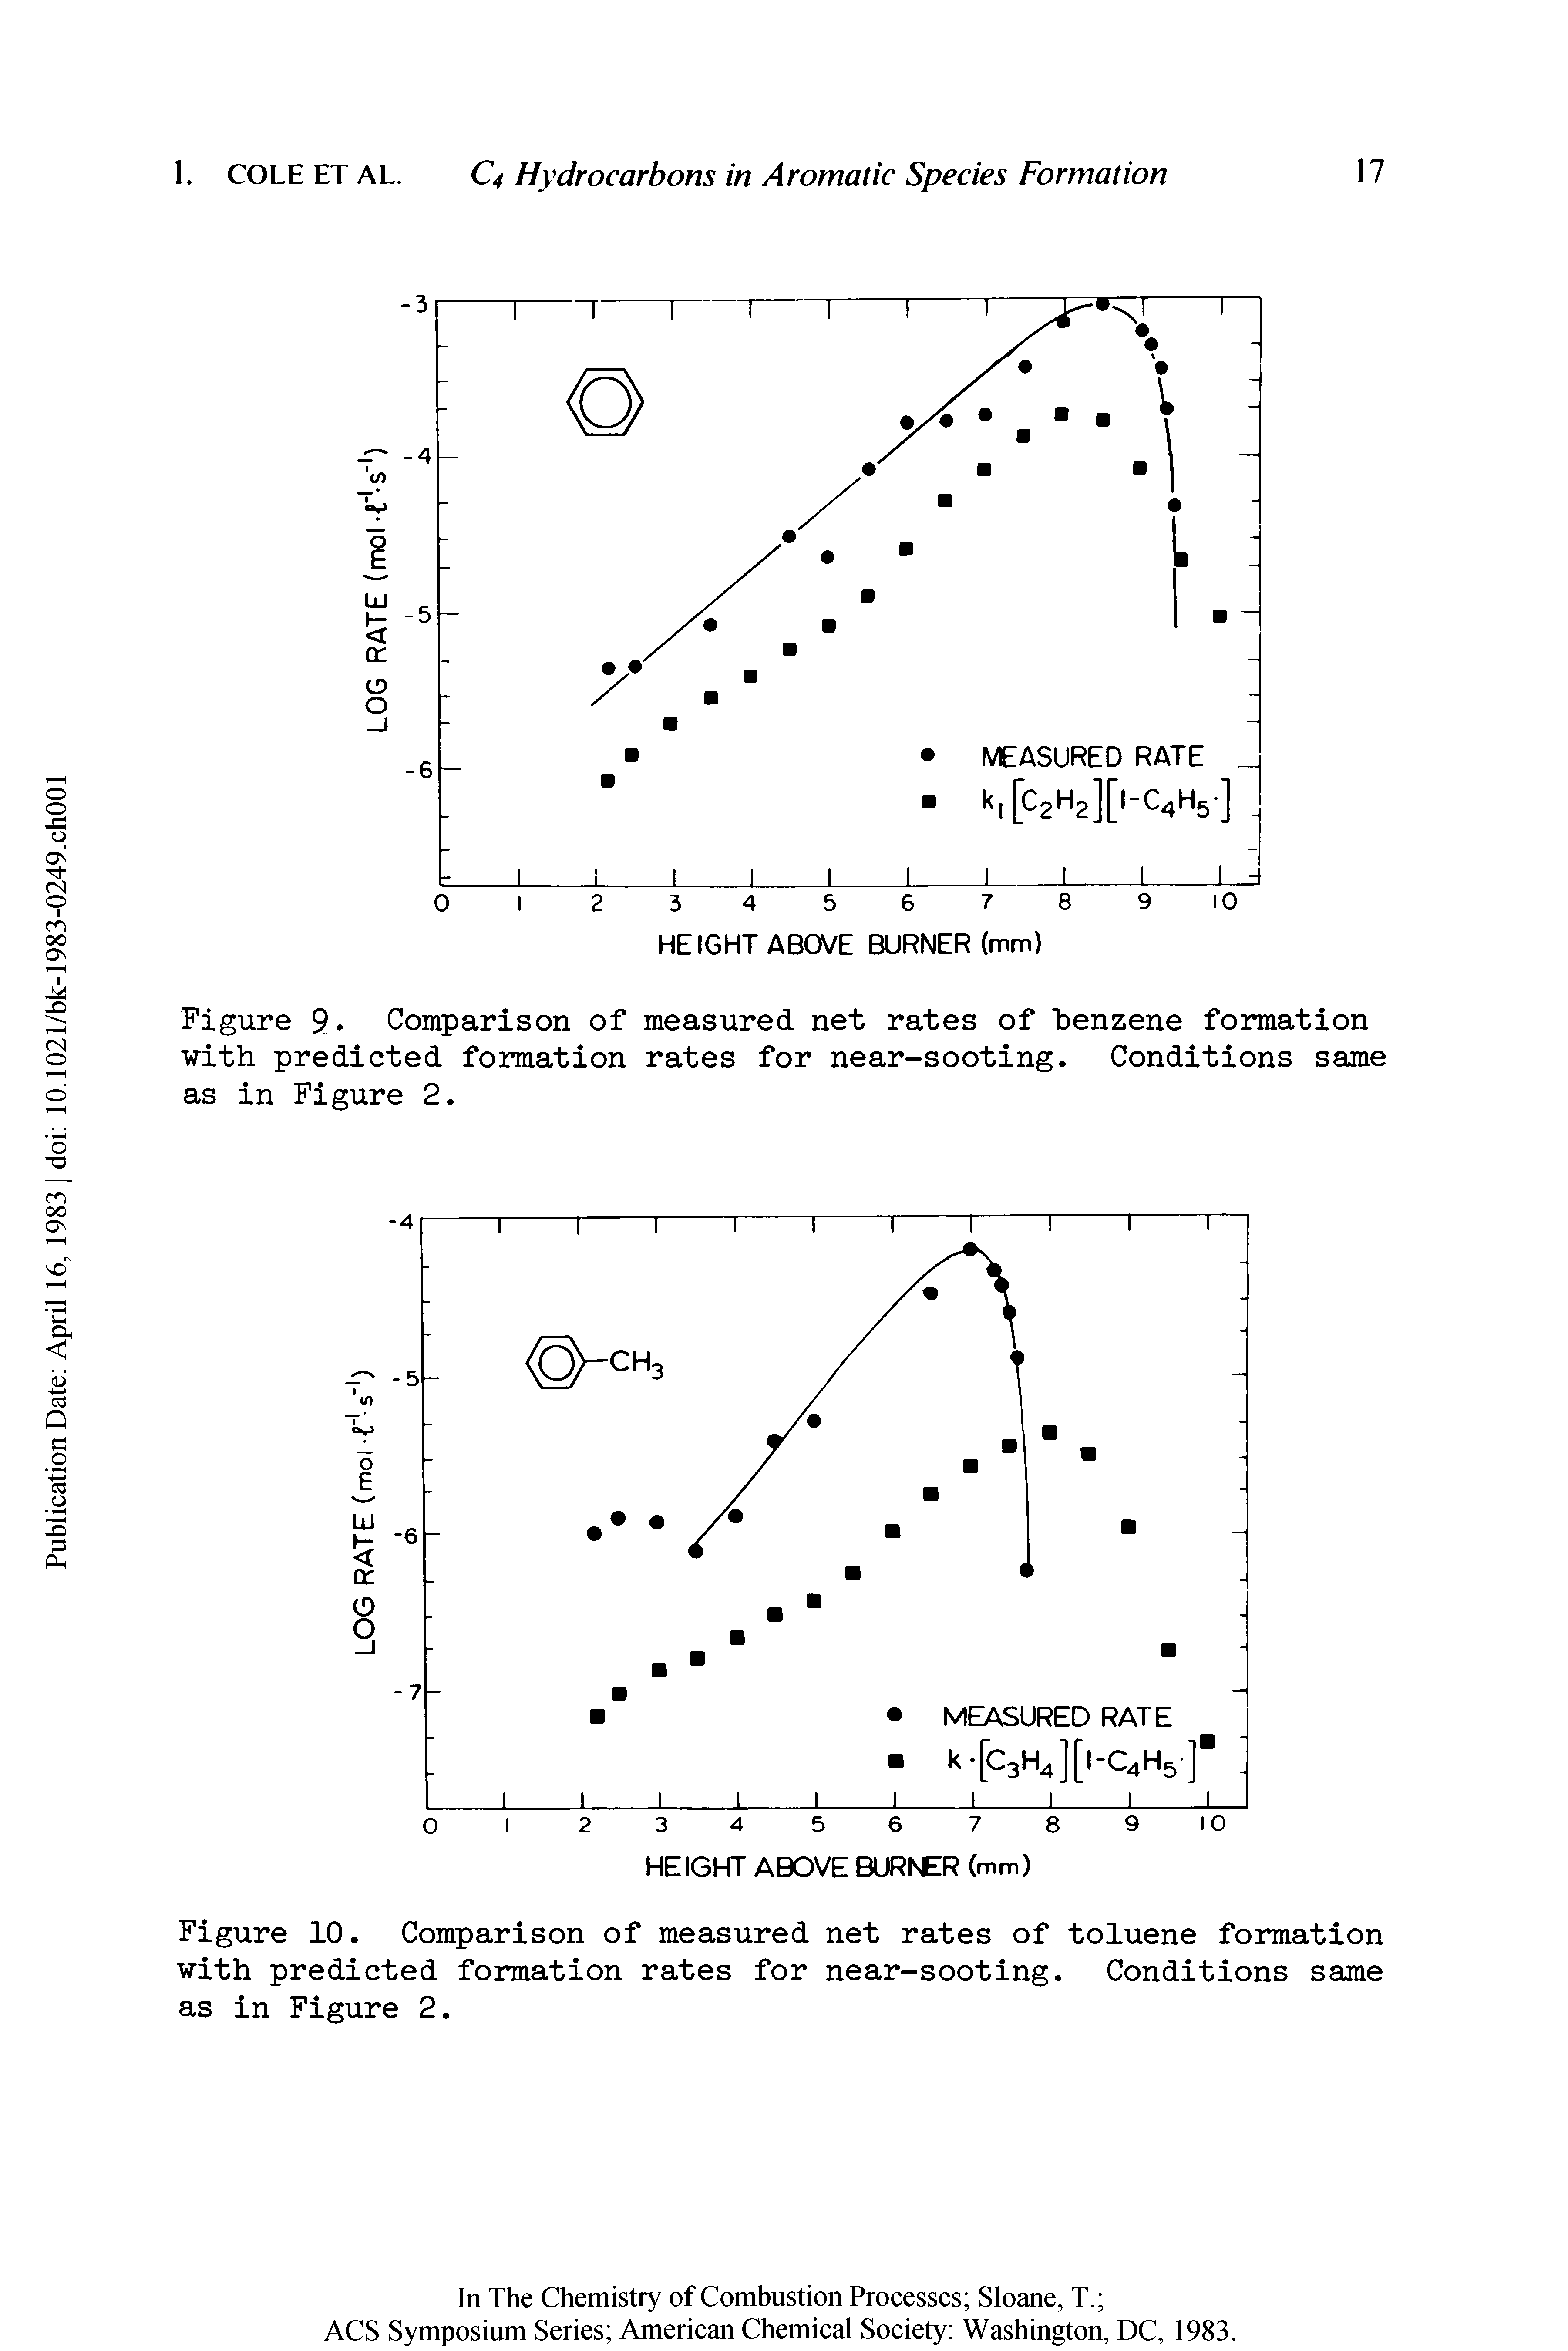 Figure 10. Comparison of measured net rates of toluene formation with predicted formation rates for near-sooting. Conditions same as in Figure 2.